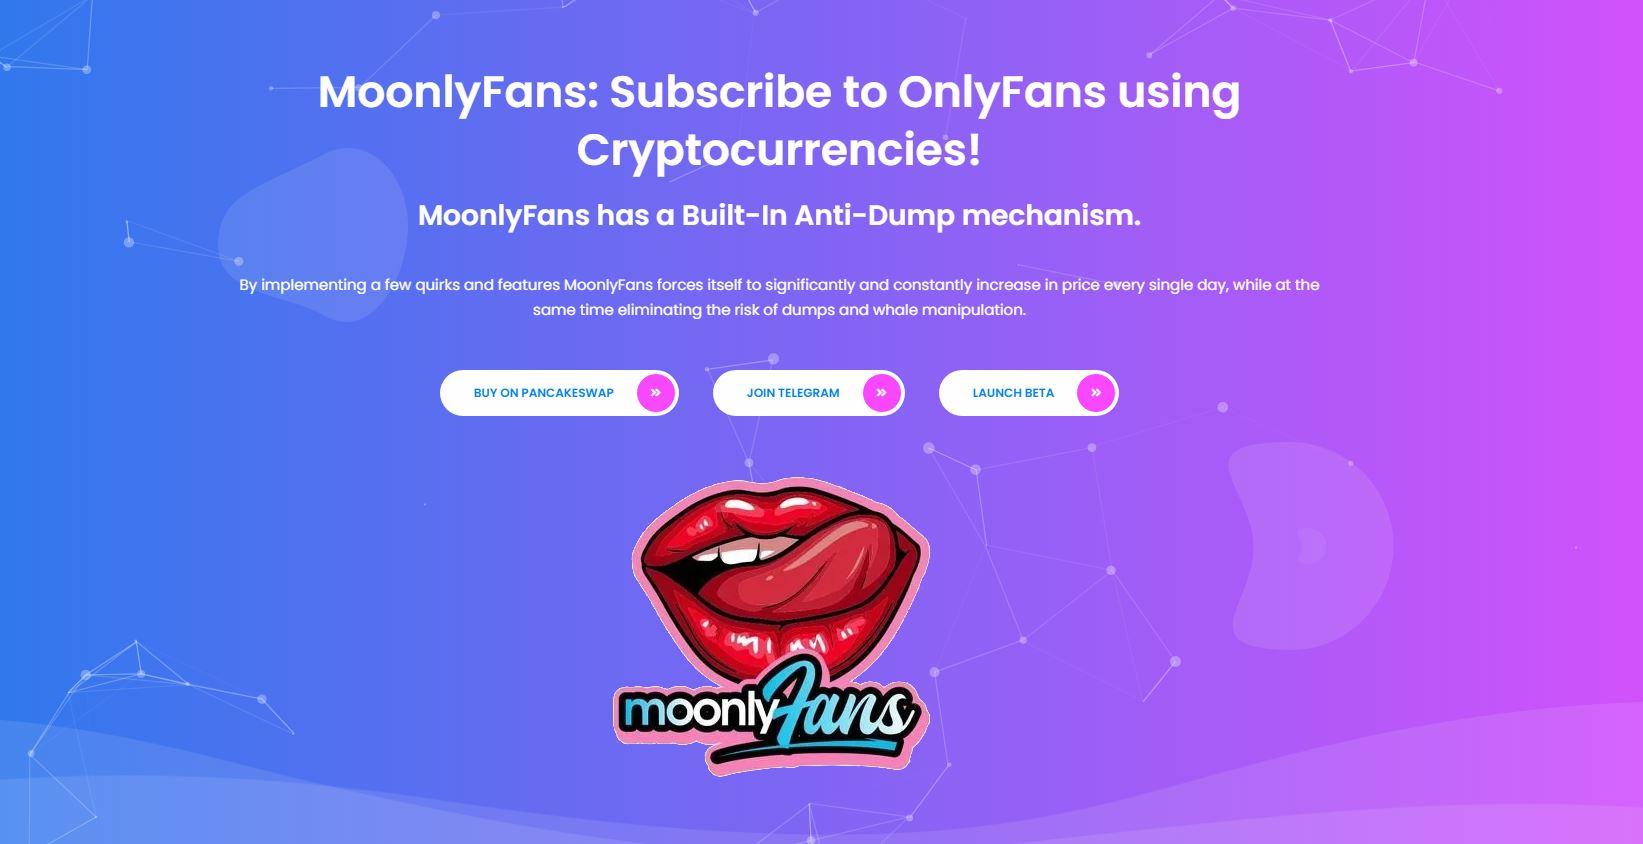 where to buy moonlyfans crypto